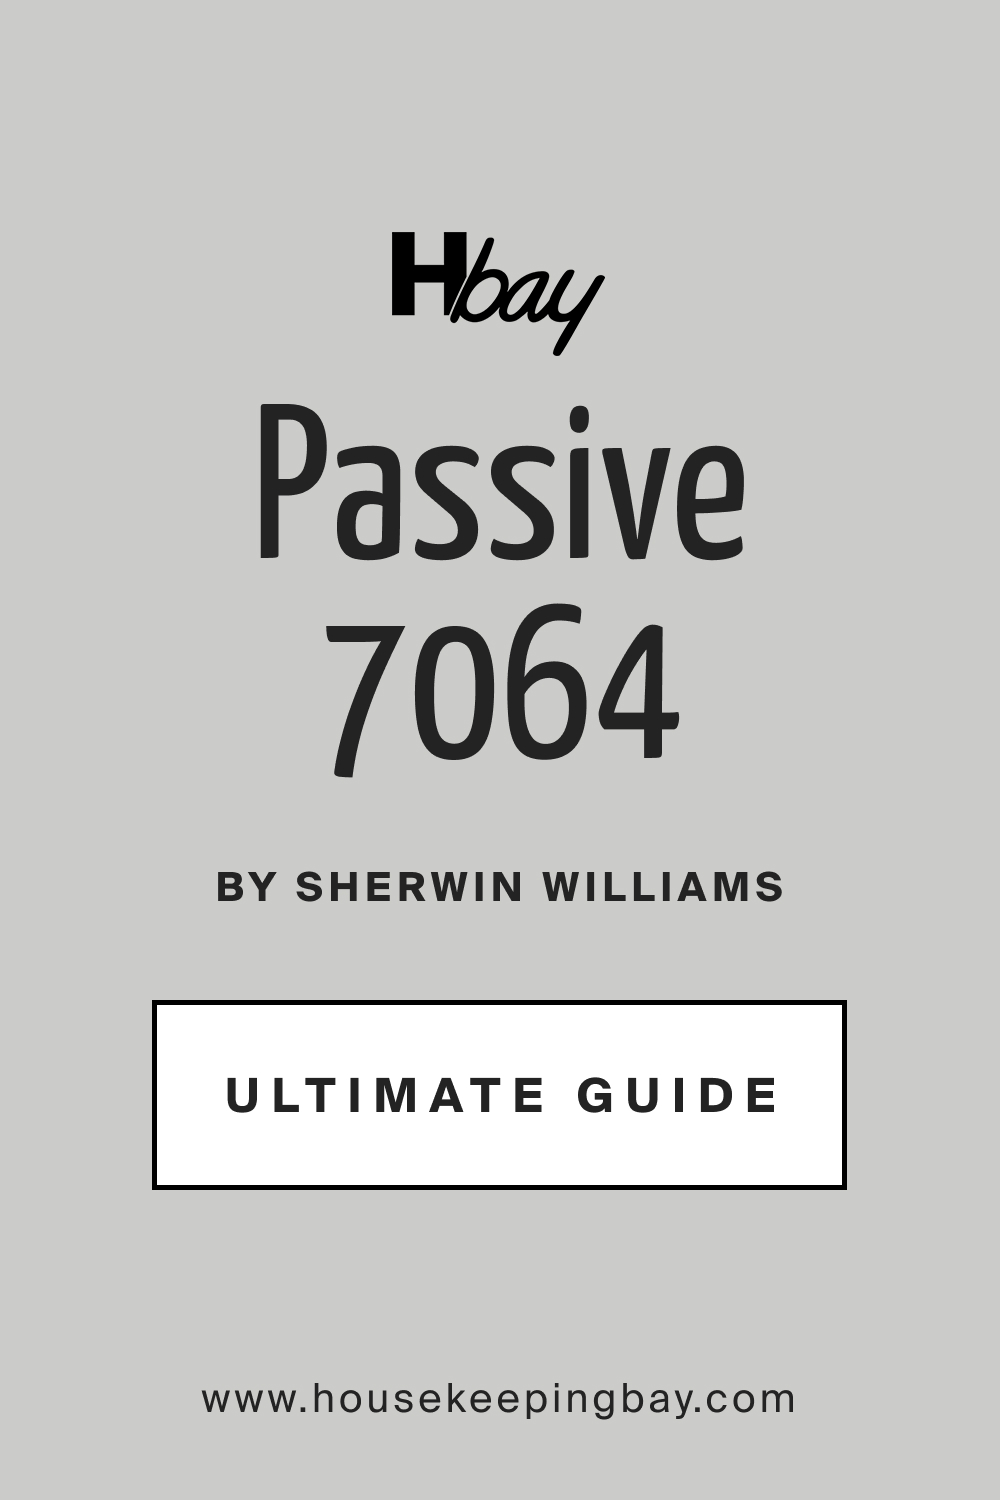 Passive SW 7064 by Sherwin Williams Ultimate Guide